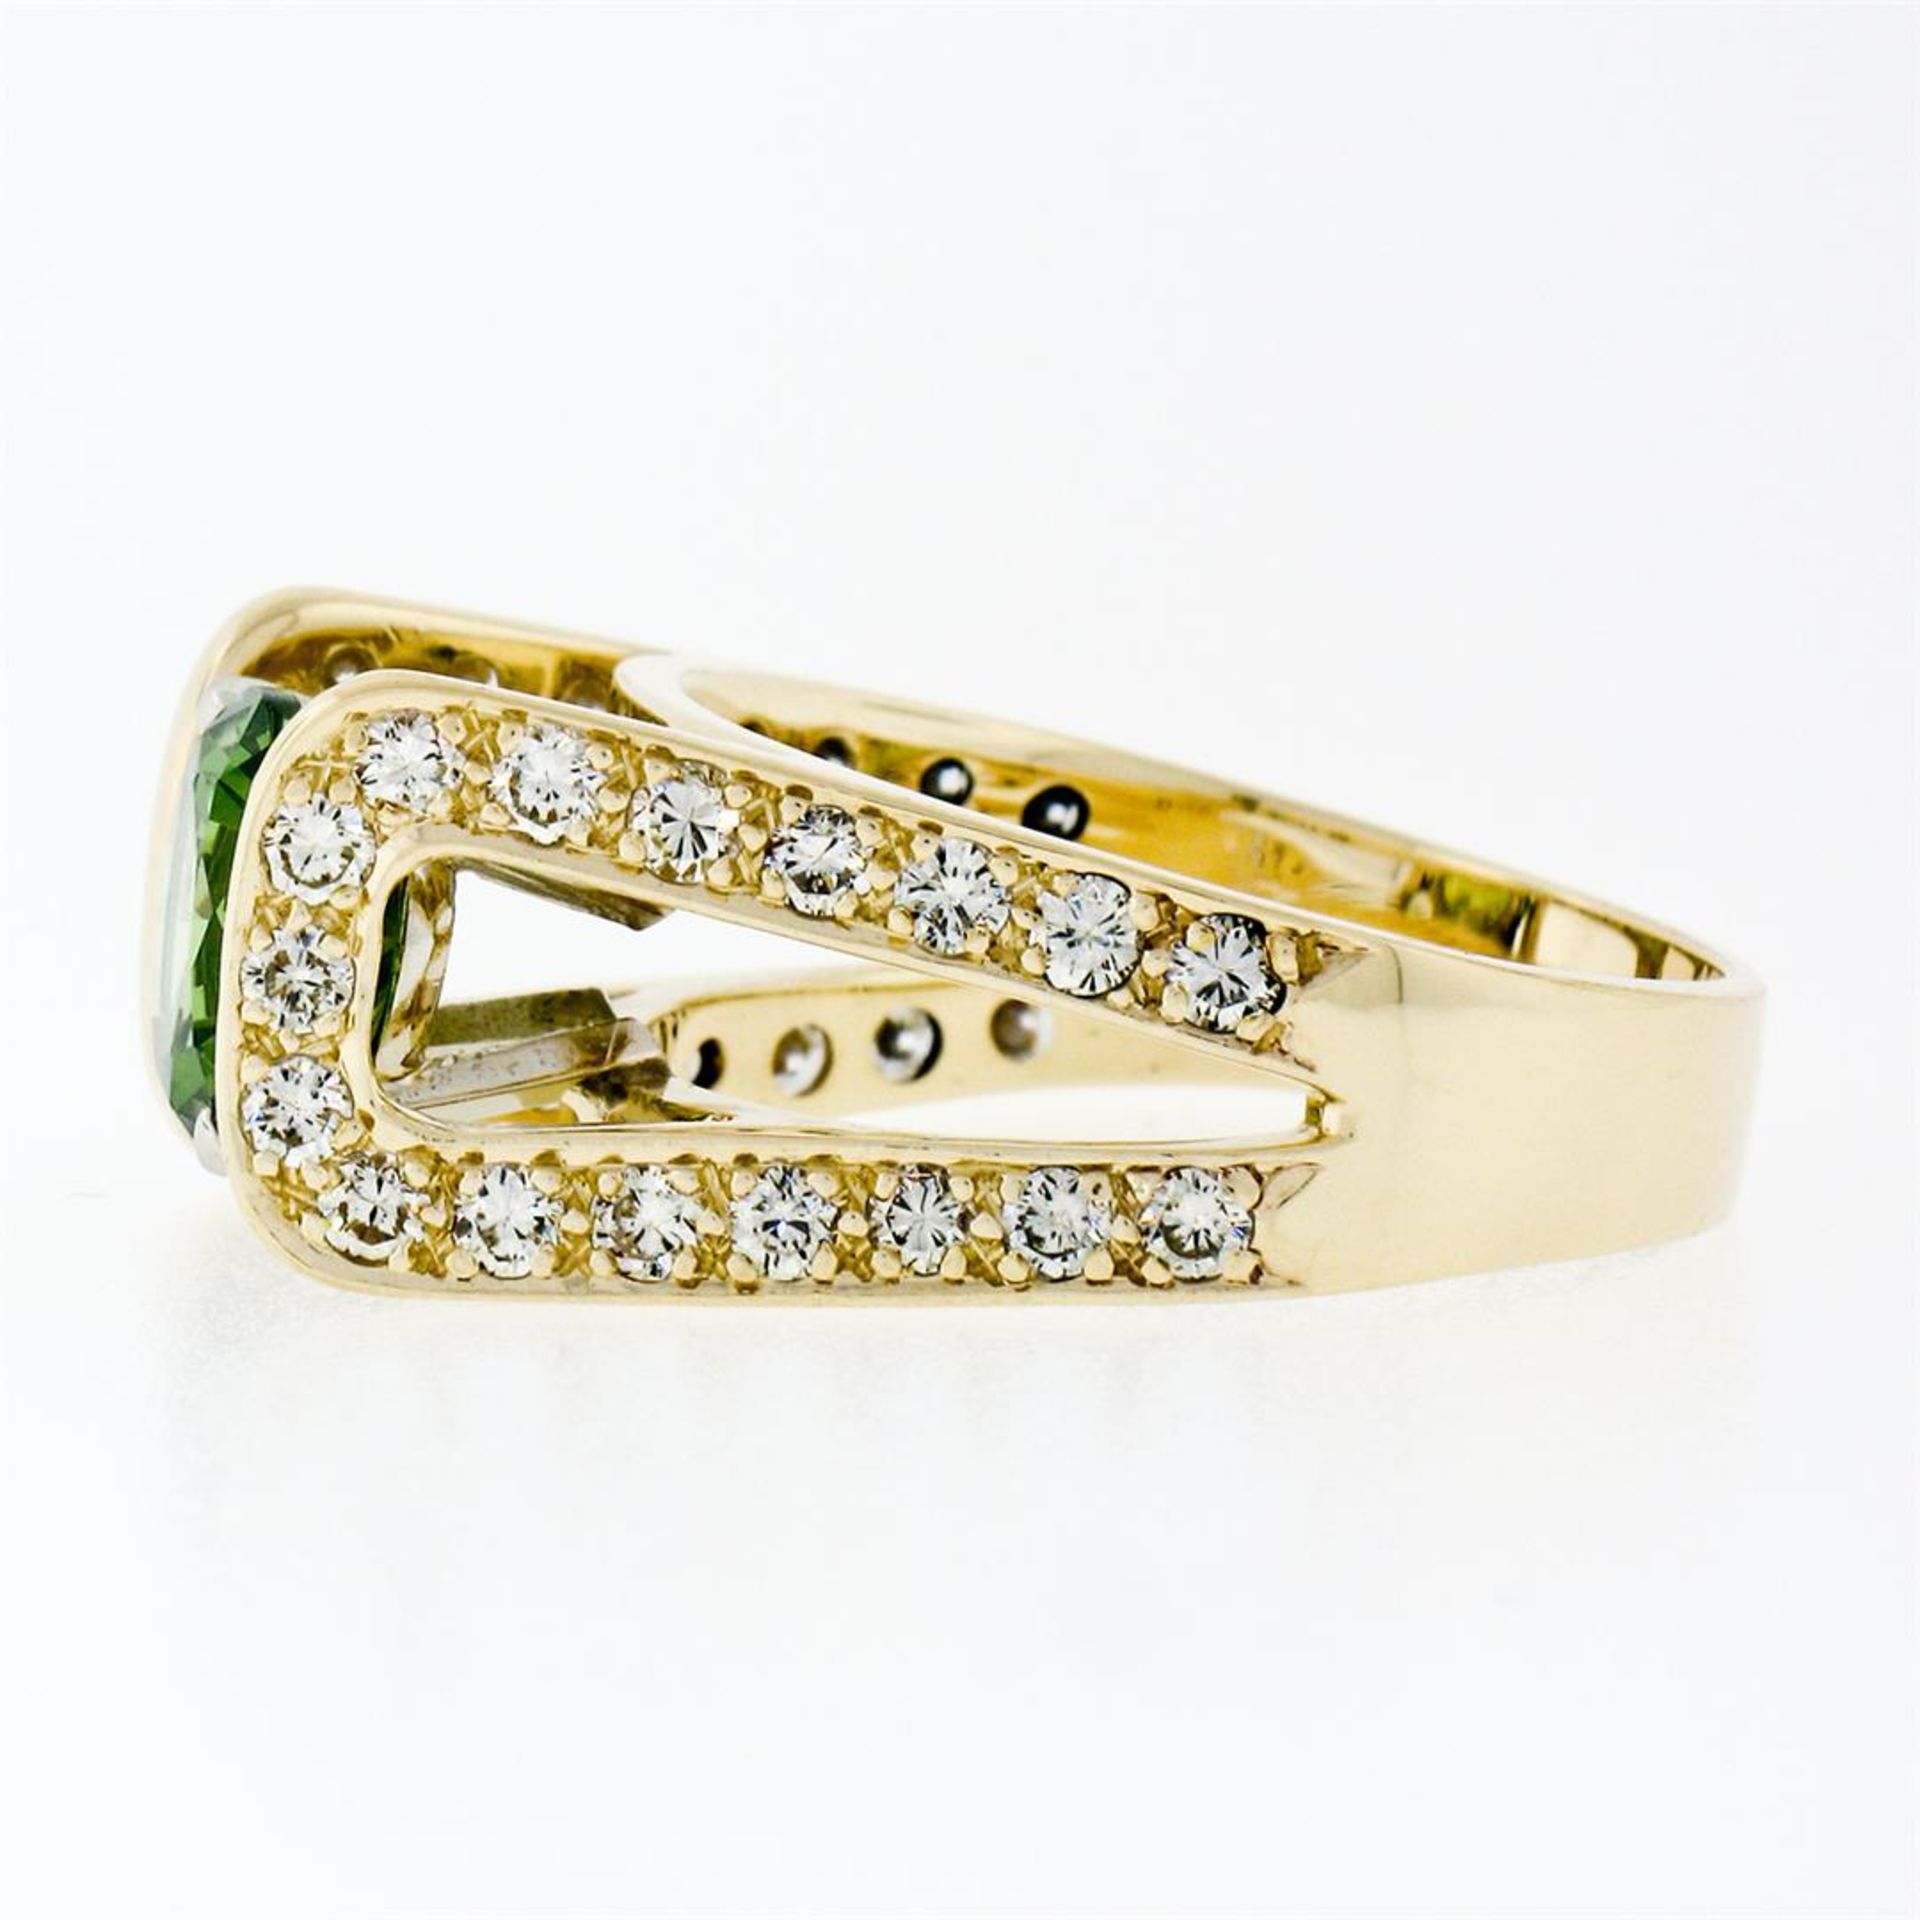 14k Yellow Gold 3.0ctw Round Peridot Solitaire & Ideal Cut Diamond Cocktail Ring - Image 7 of 9